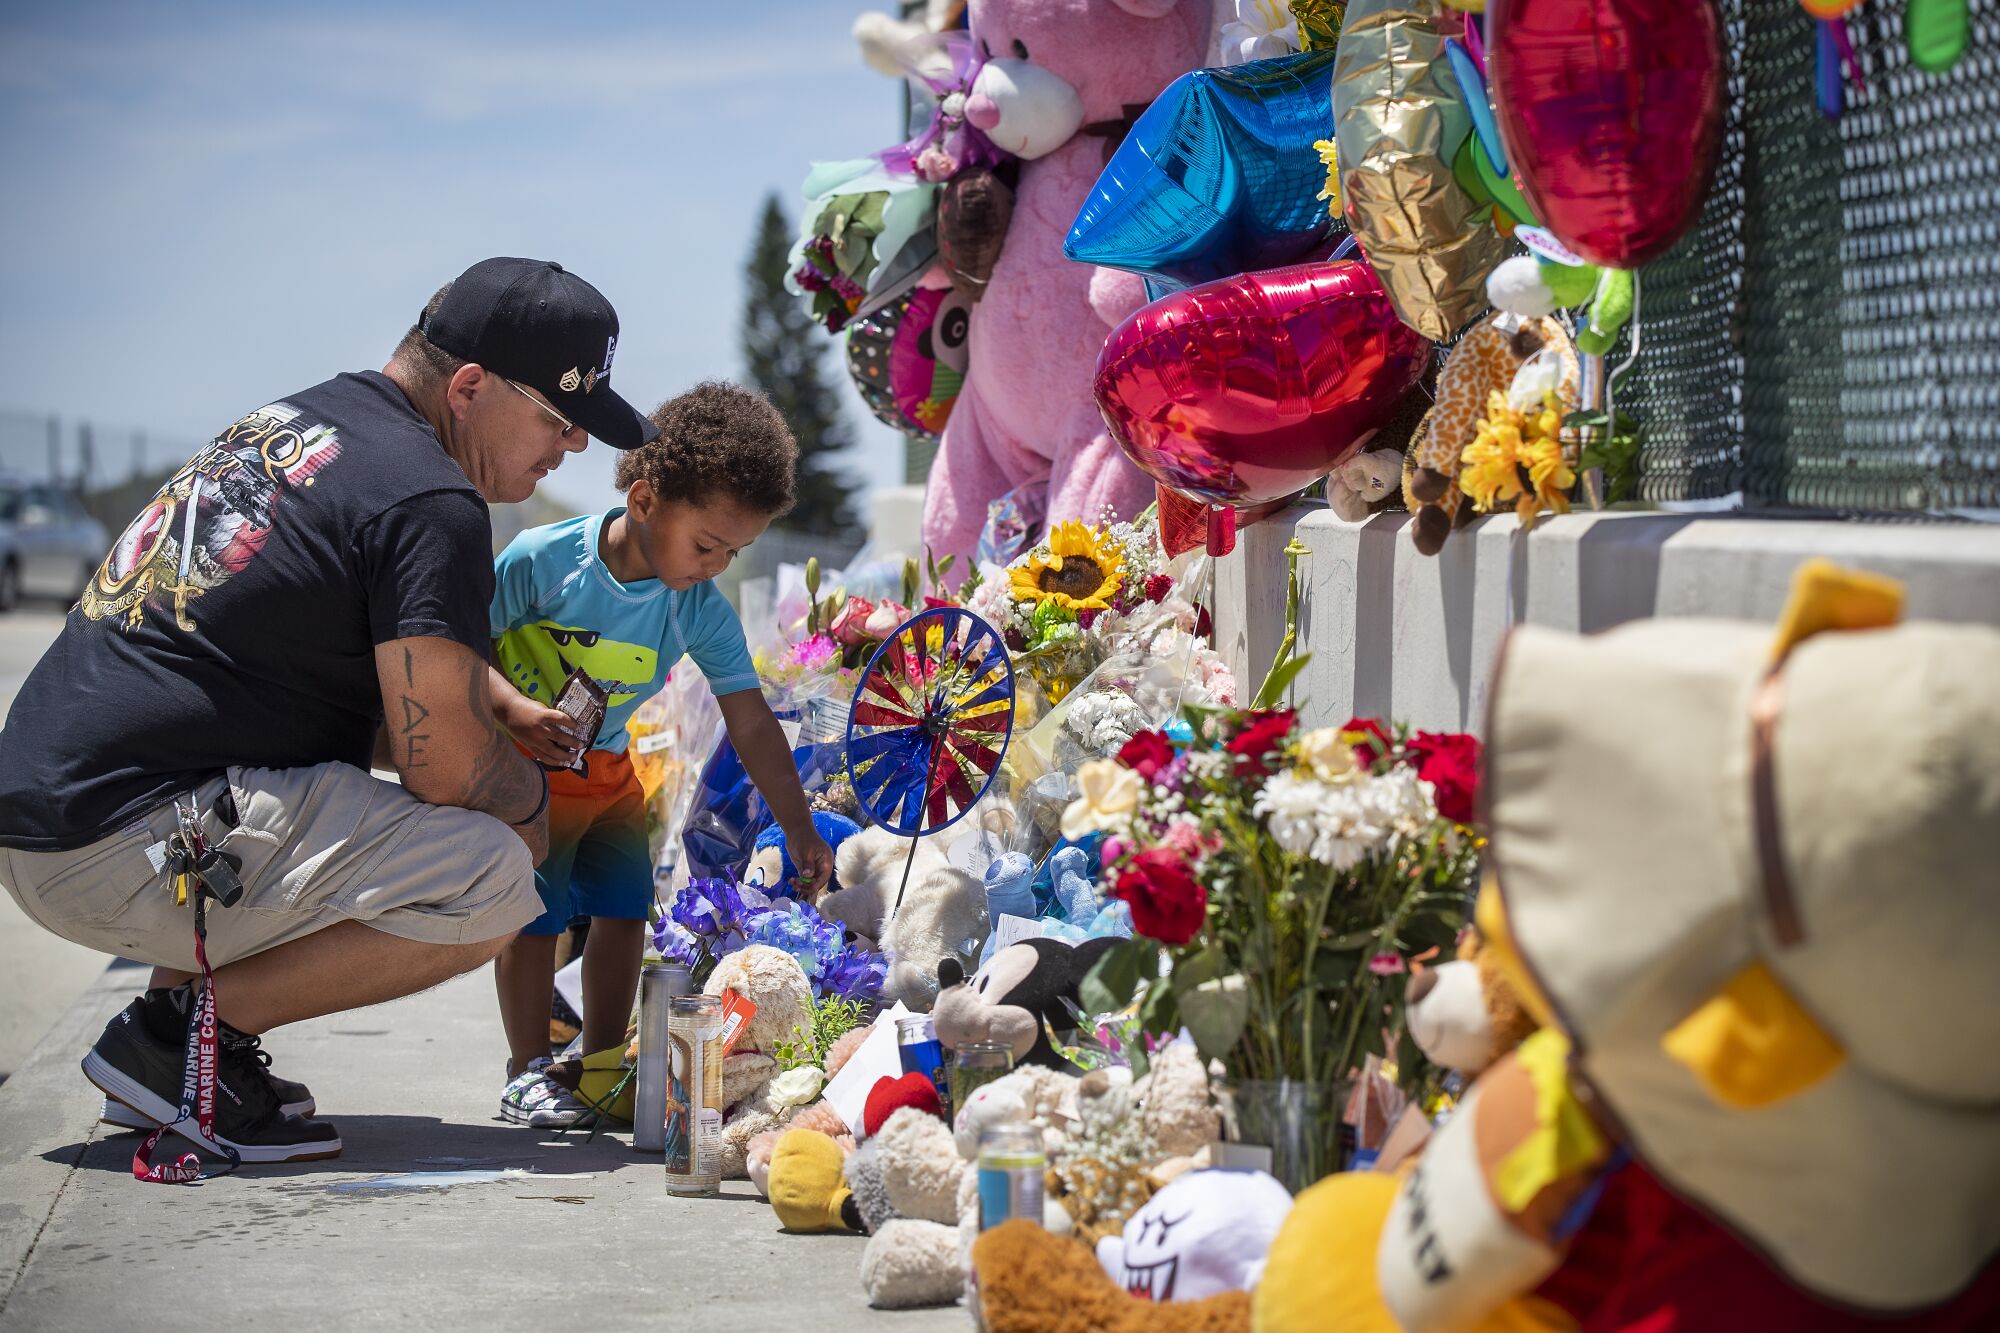 Albert Lamonte of Huntington Beach helps his son, Marcel, 2, place flowers and a pinwheel at a memorial for Aiden Leos.